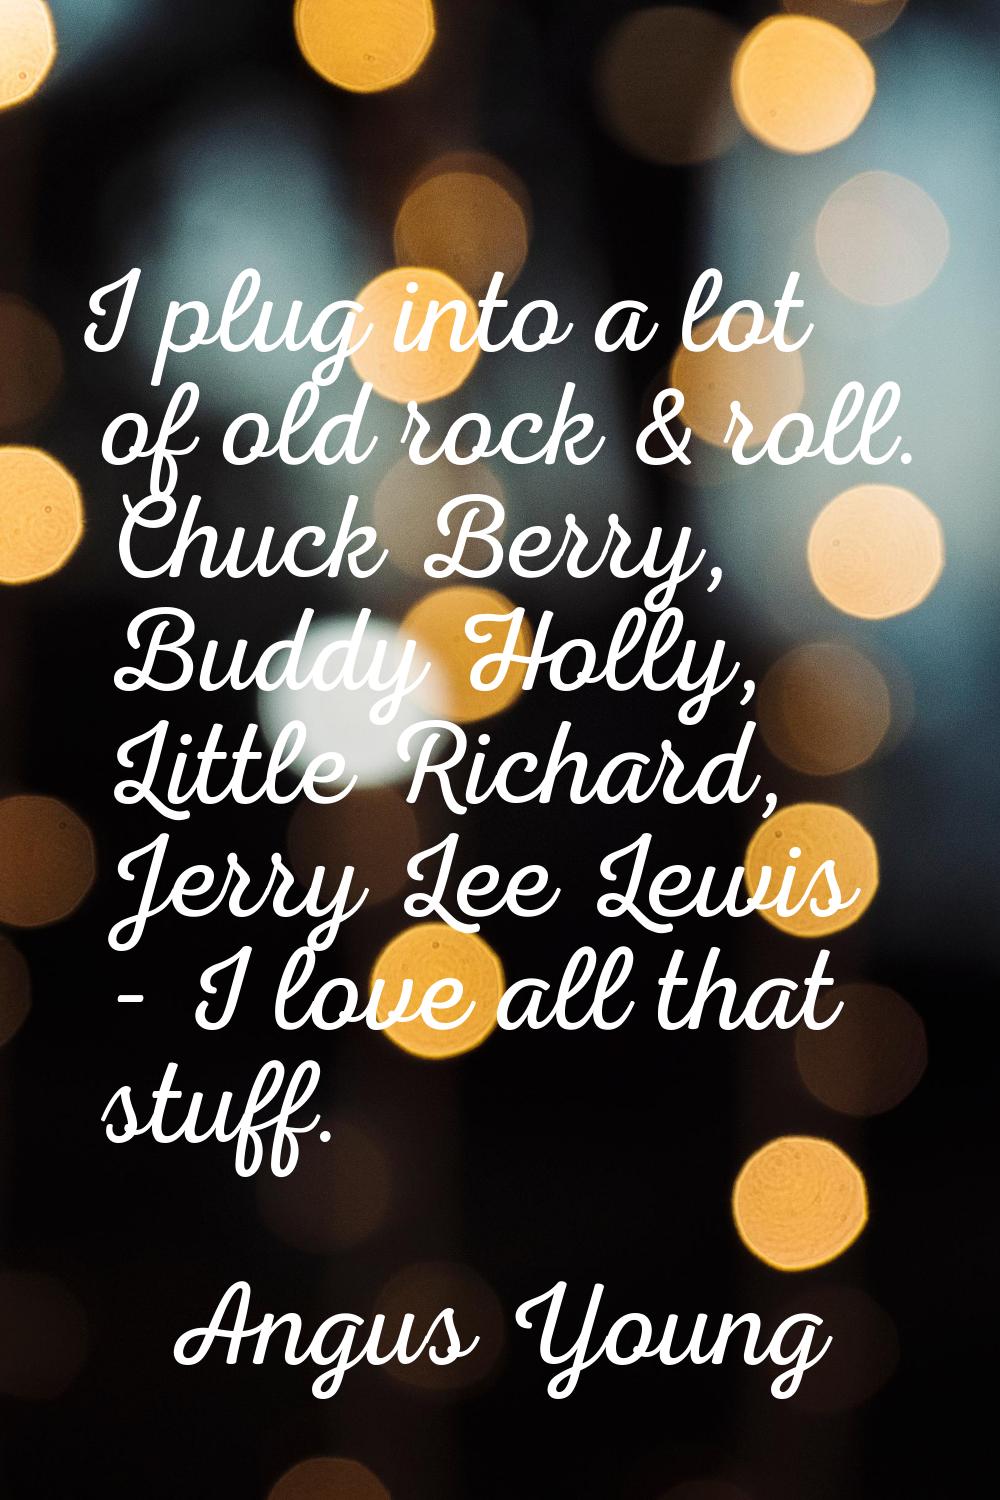 I plug into a lot of old rock & roll. Chuck Berry, Buddy Holly, Little Richard, Jerry Lee Lewis - I